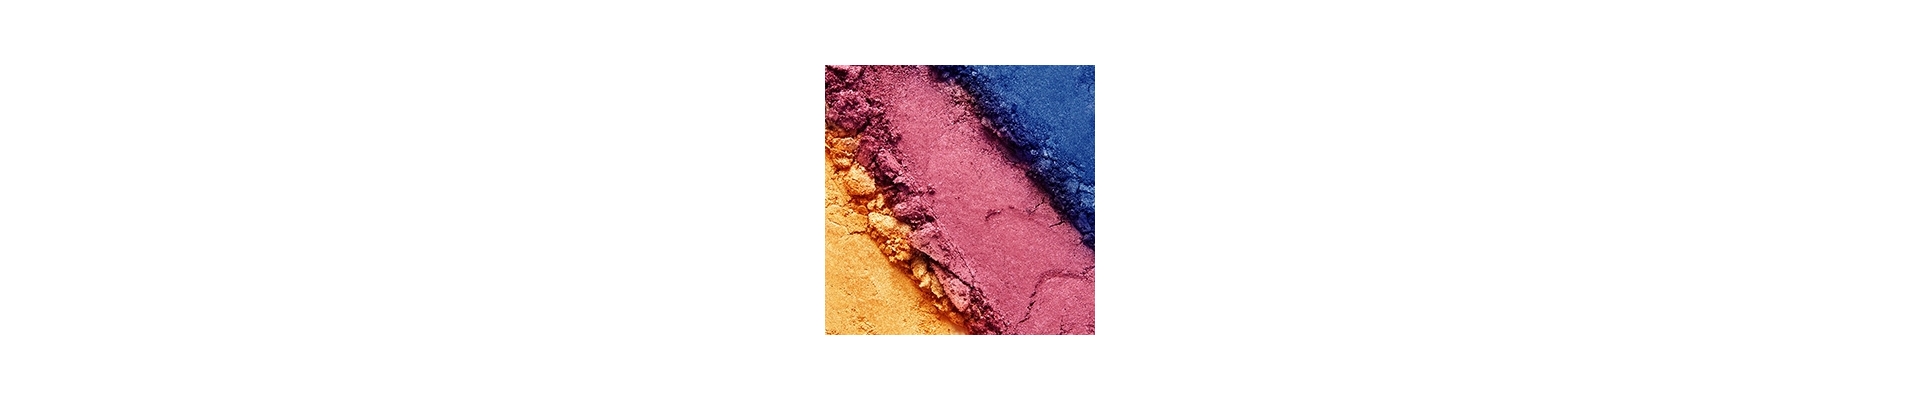 Mica Powders for Cosmetics & Toiletries | The Soap Kitchen™